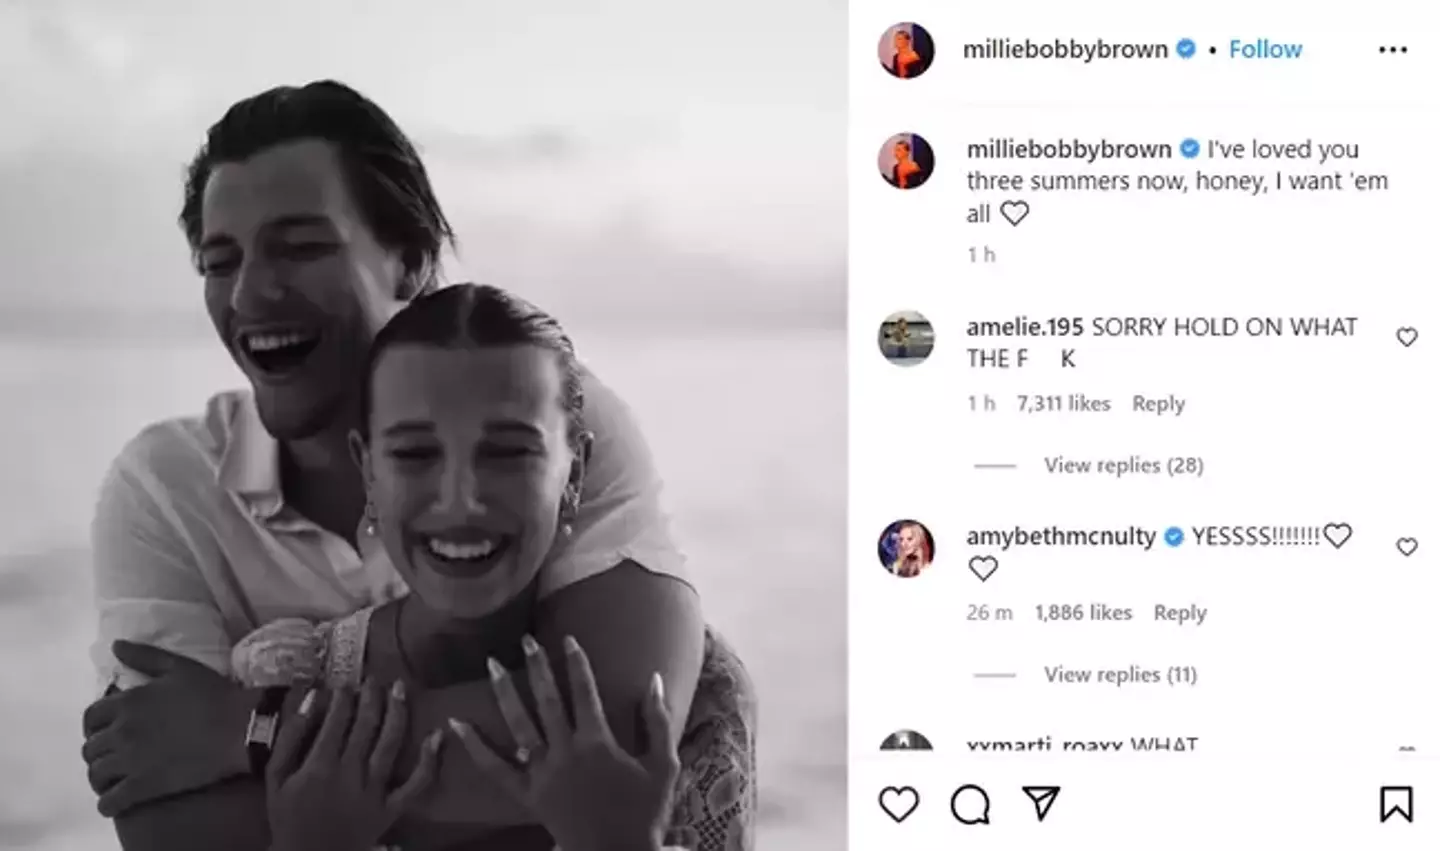 Millie Bobby Brown announced her engagement today.